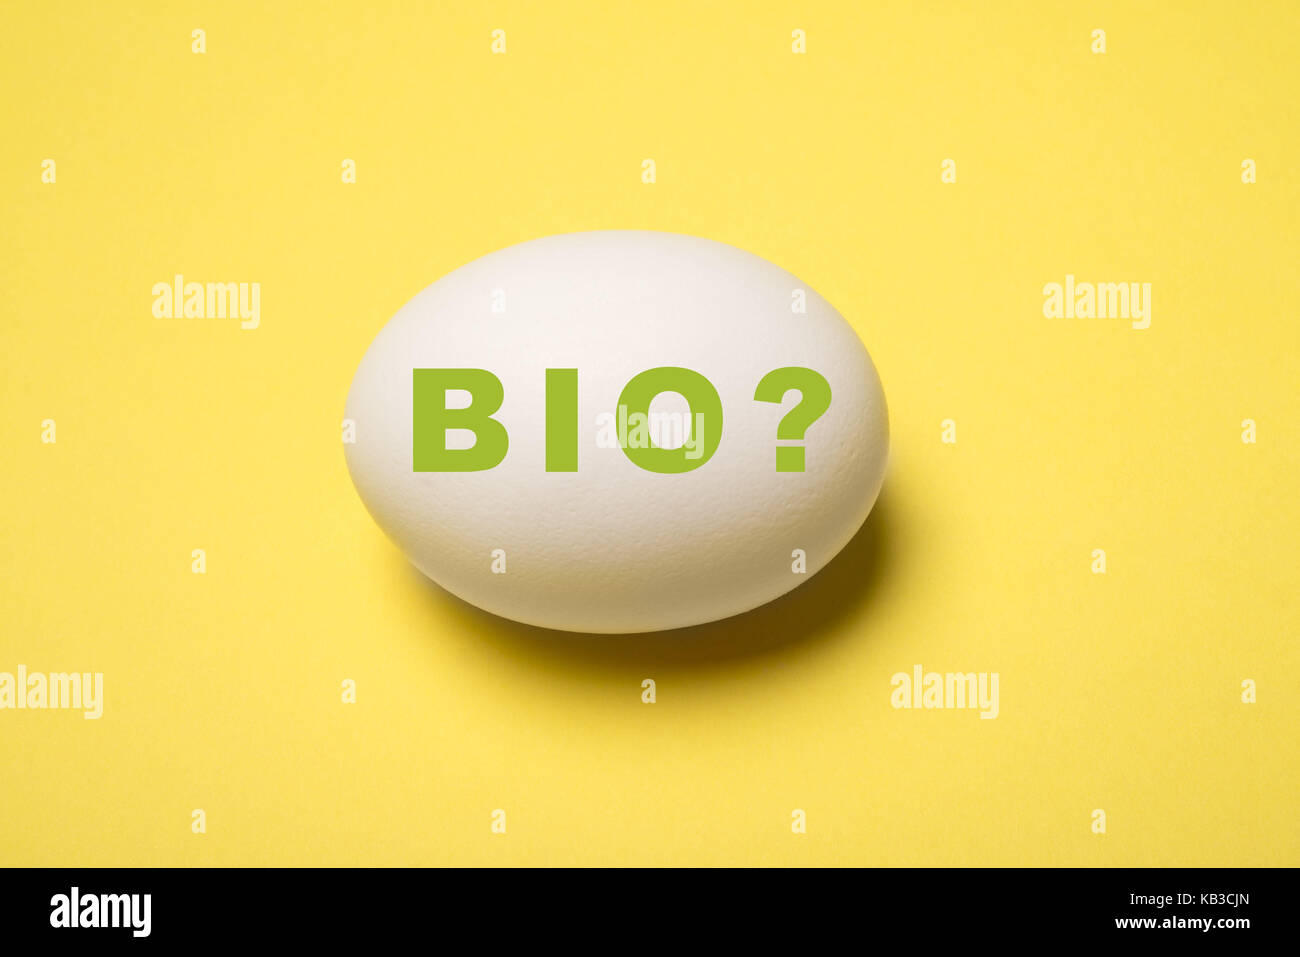 Oh, label, biology?, question, bio-egg, question mark, biology, Bioei, egg, white, Hühnerei, biodelusion, organic farming, Salmonellengefahr, bioposition, food, deception, food poisoning, ground food, dizzinesses, misleading packaging, poultry position, biochicken, examined, forgery, dioxin, dioxin charge, yellow, green, questionably, Stock Photo